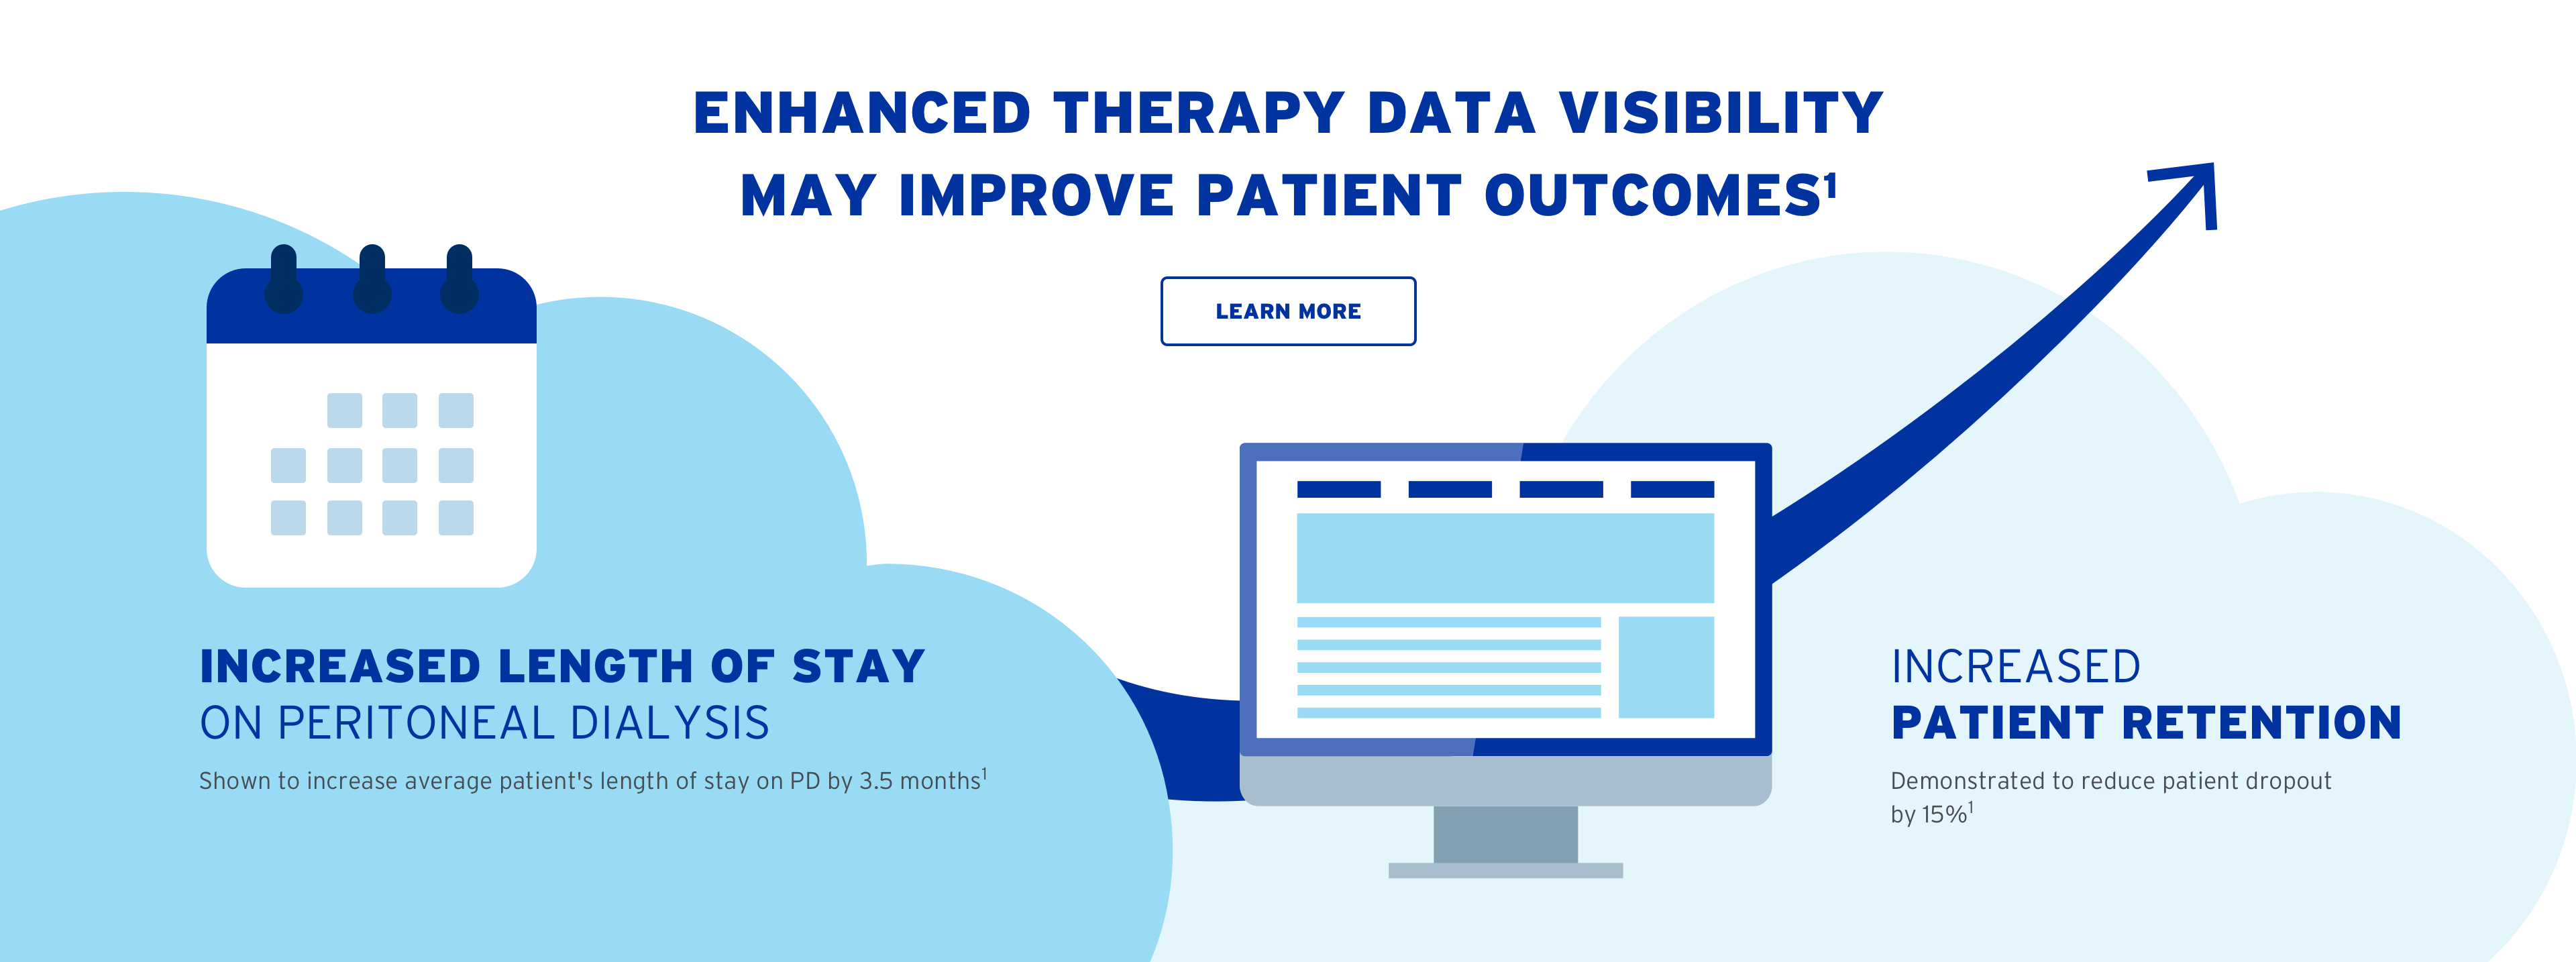 Enhanced therapy data visibility may improve patient outcomes